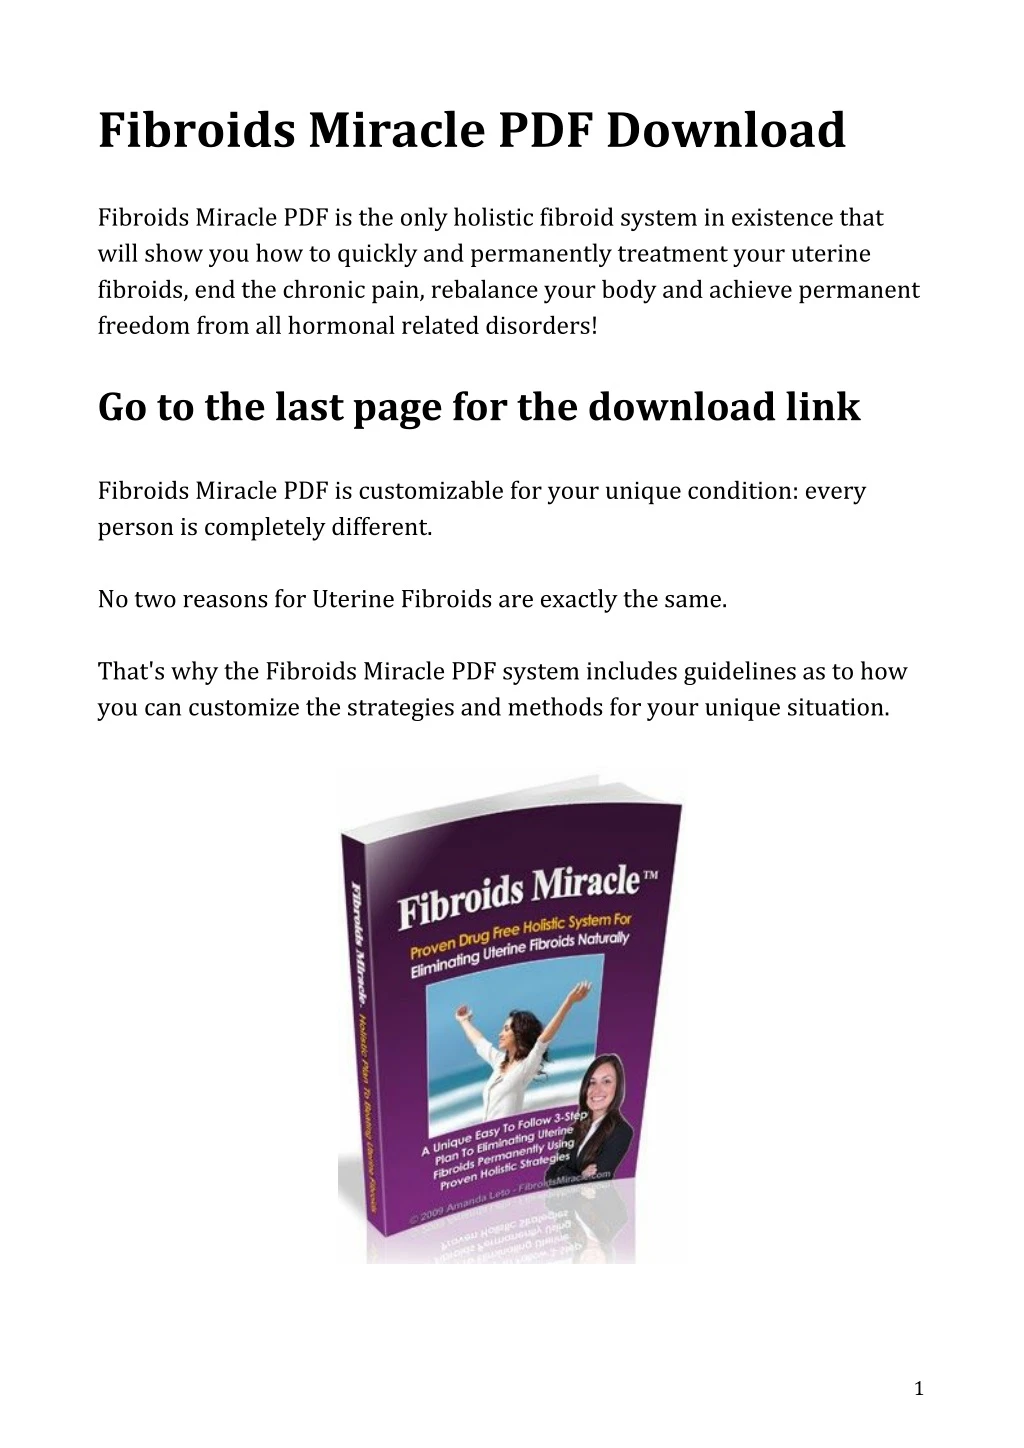 fibroids miracle pdf download fibroids miracle